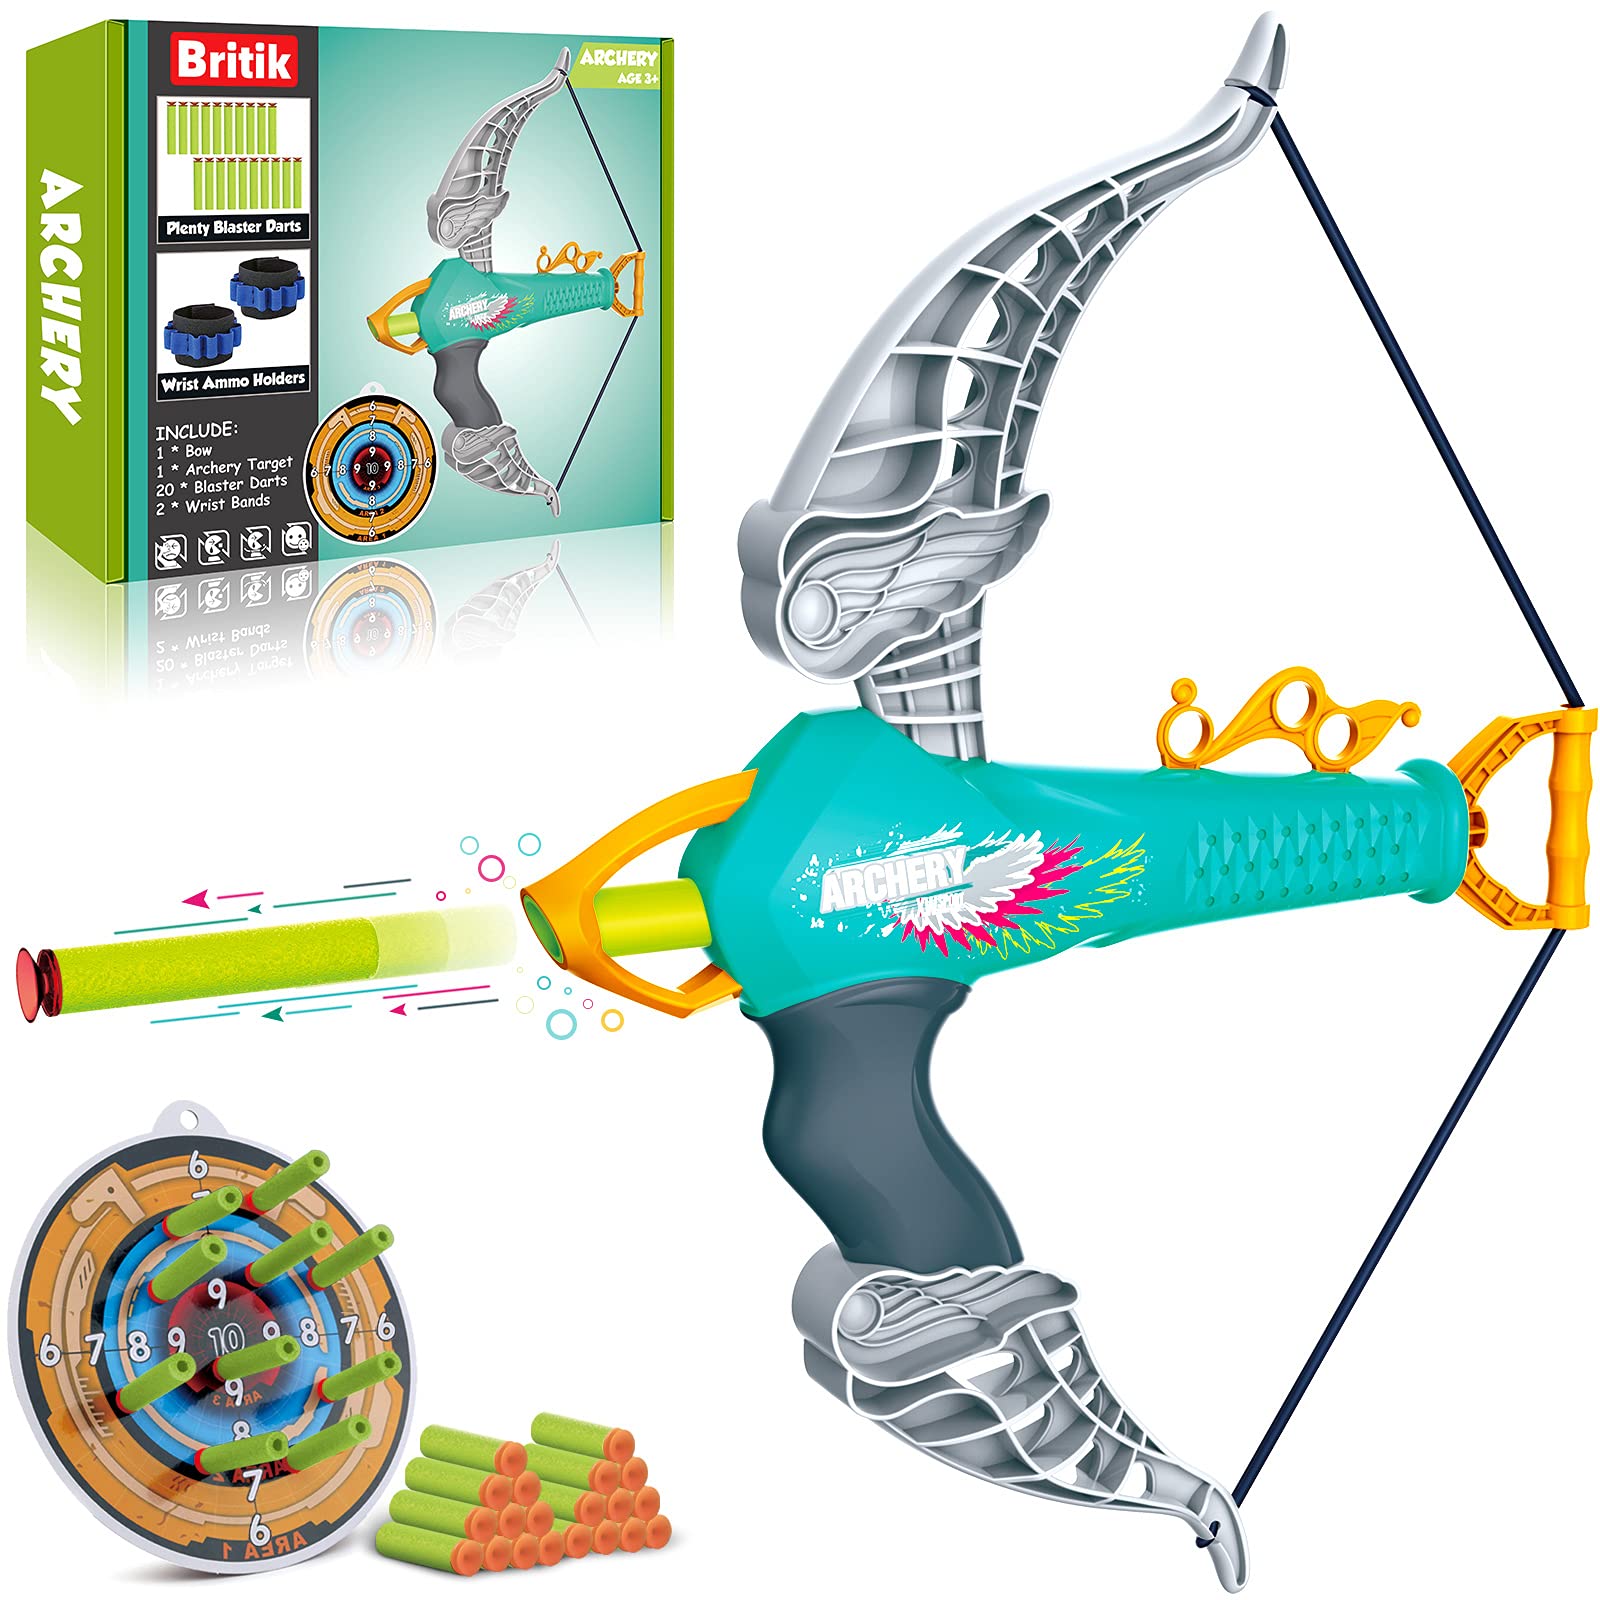 Britik Bow and Arrow Set for 3 4 5 6 7 8 Year Old Boys, Outdoor Toys for Kids Ages 4-8 Toys for 5 Year Old Boys Toys for 6 Year Old Boys Gifts Indoor Games Birthday Gifts for Boys Girls Kids